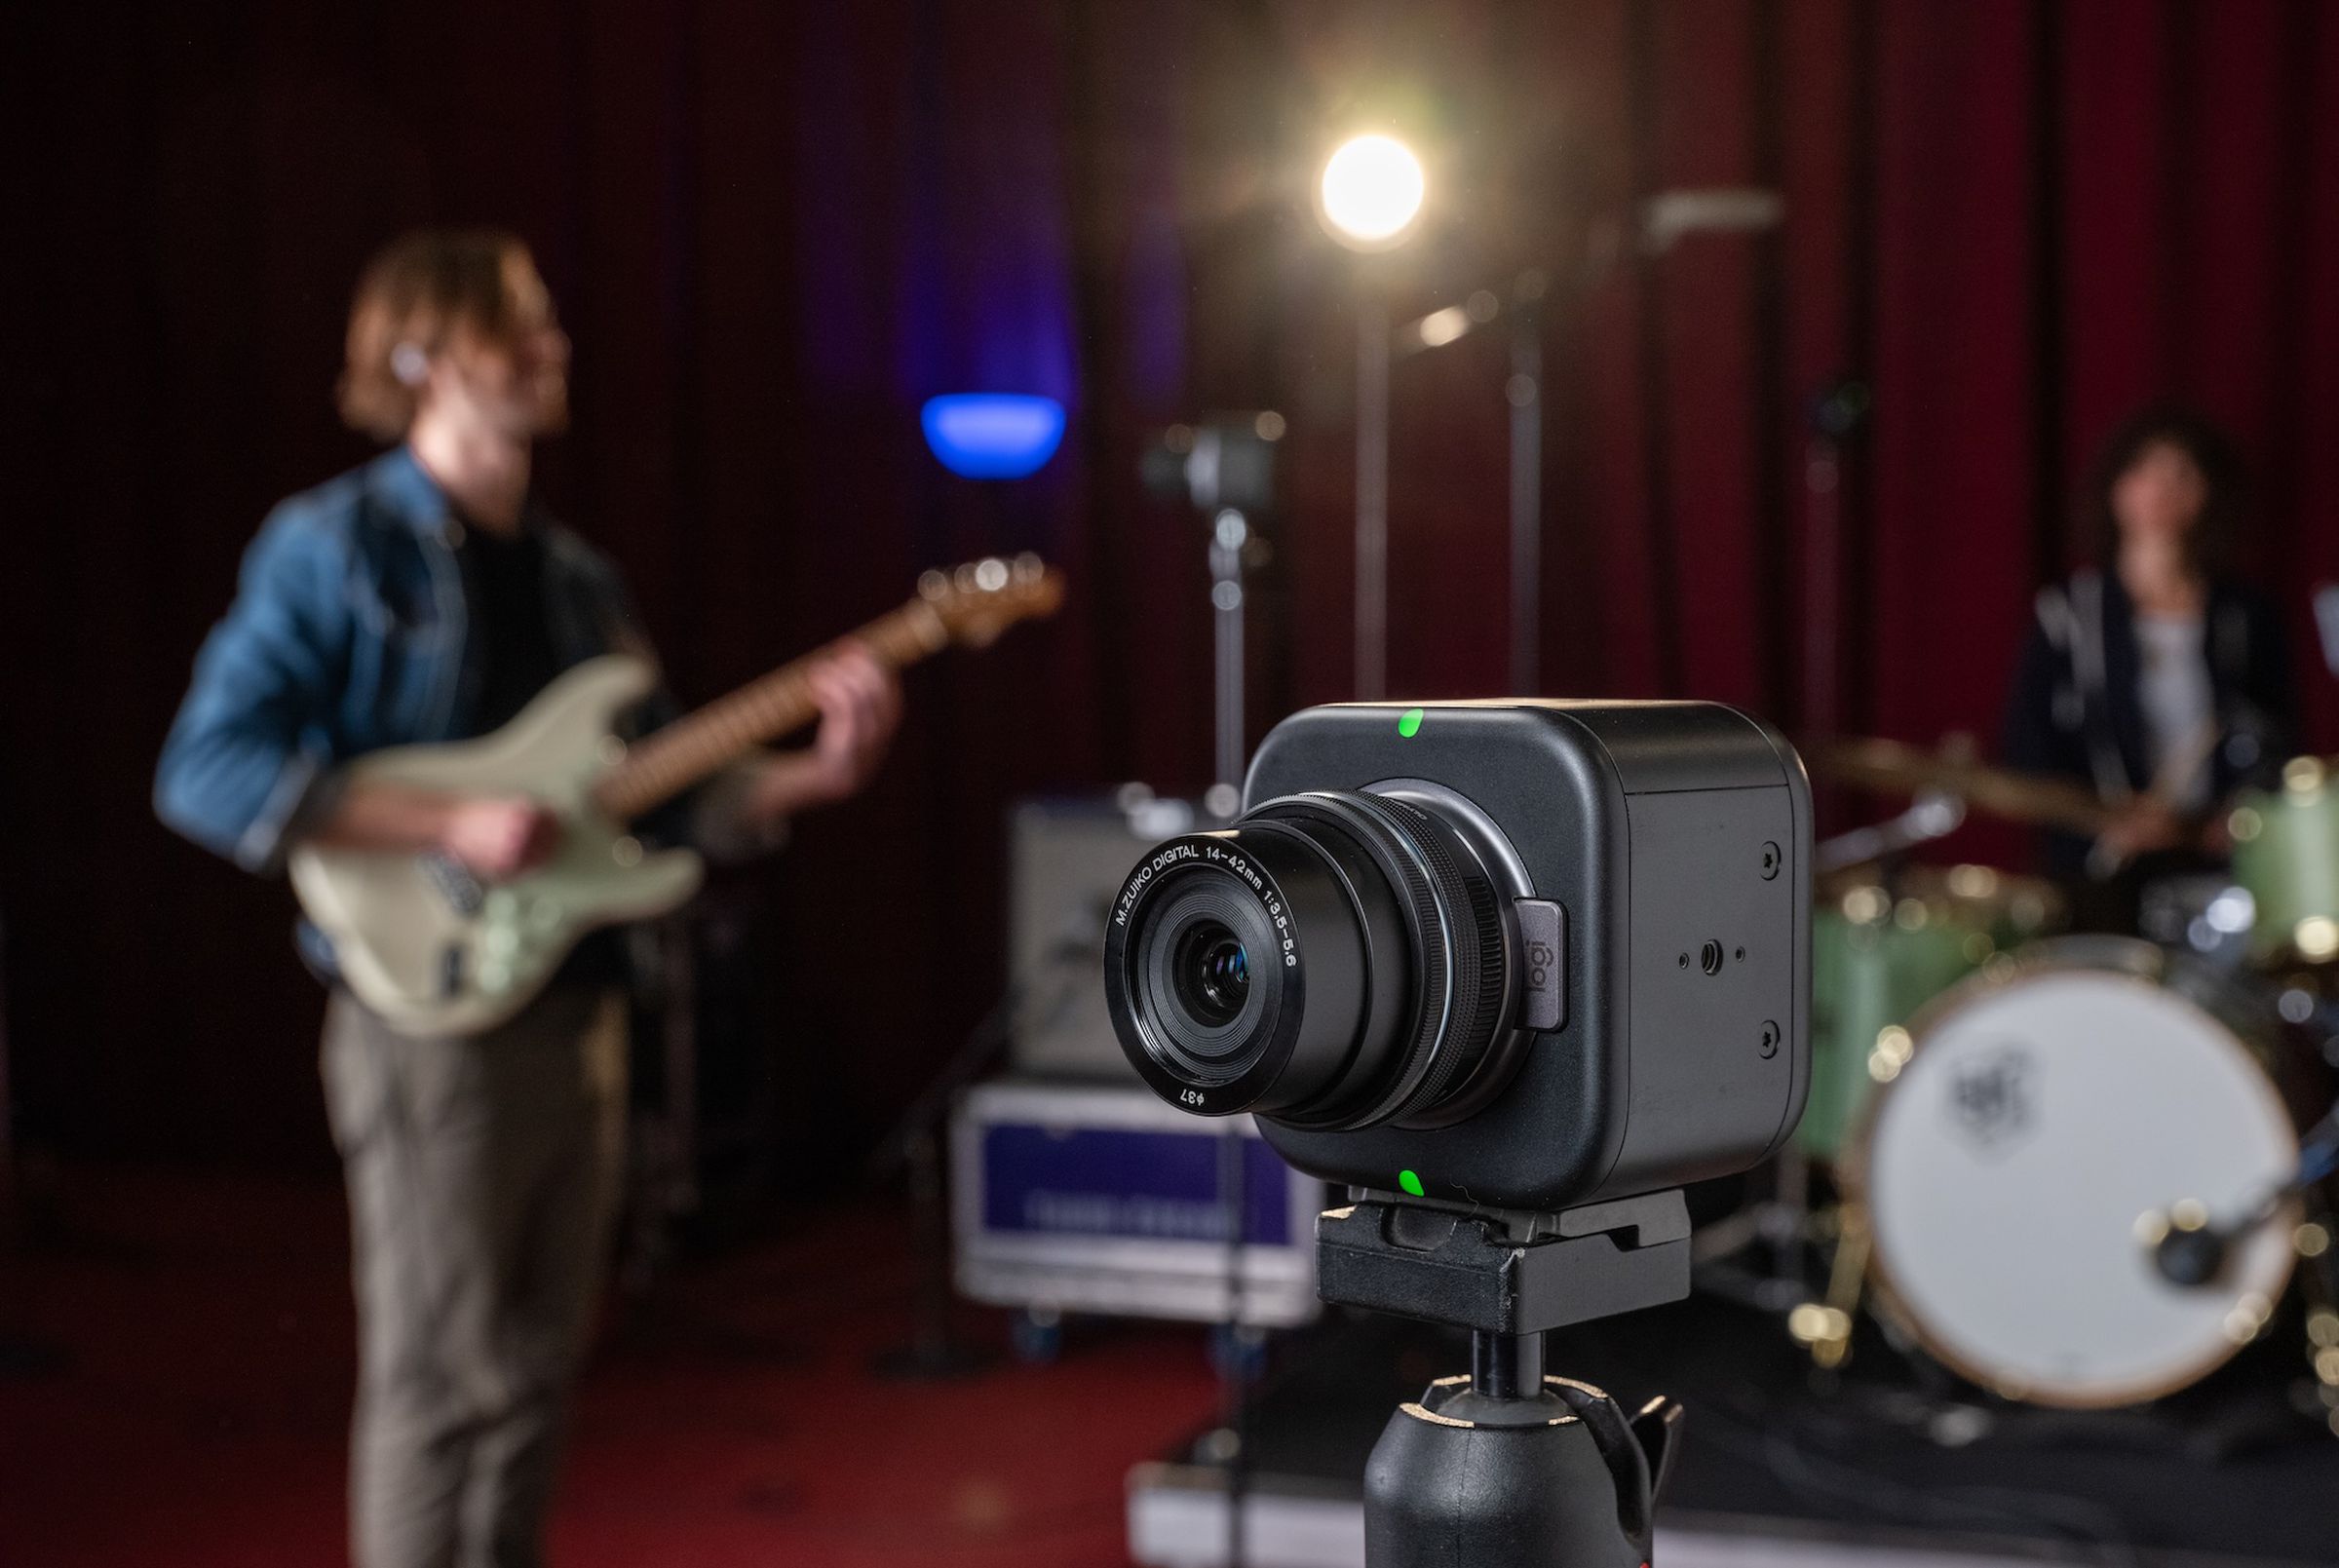 An image of Logitech’s Mevo Core camera in the foreground with a rock band playing in the background.